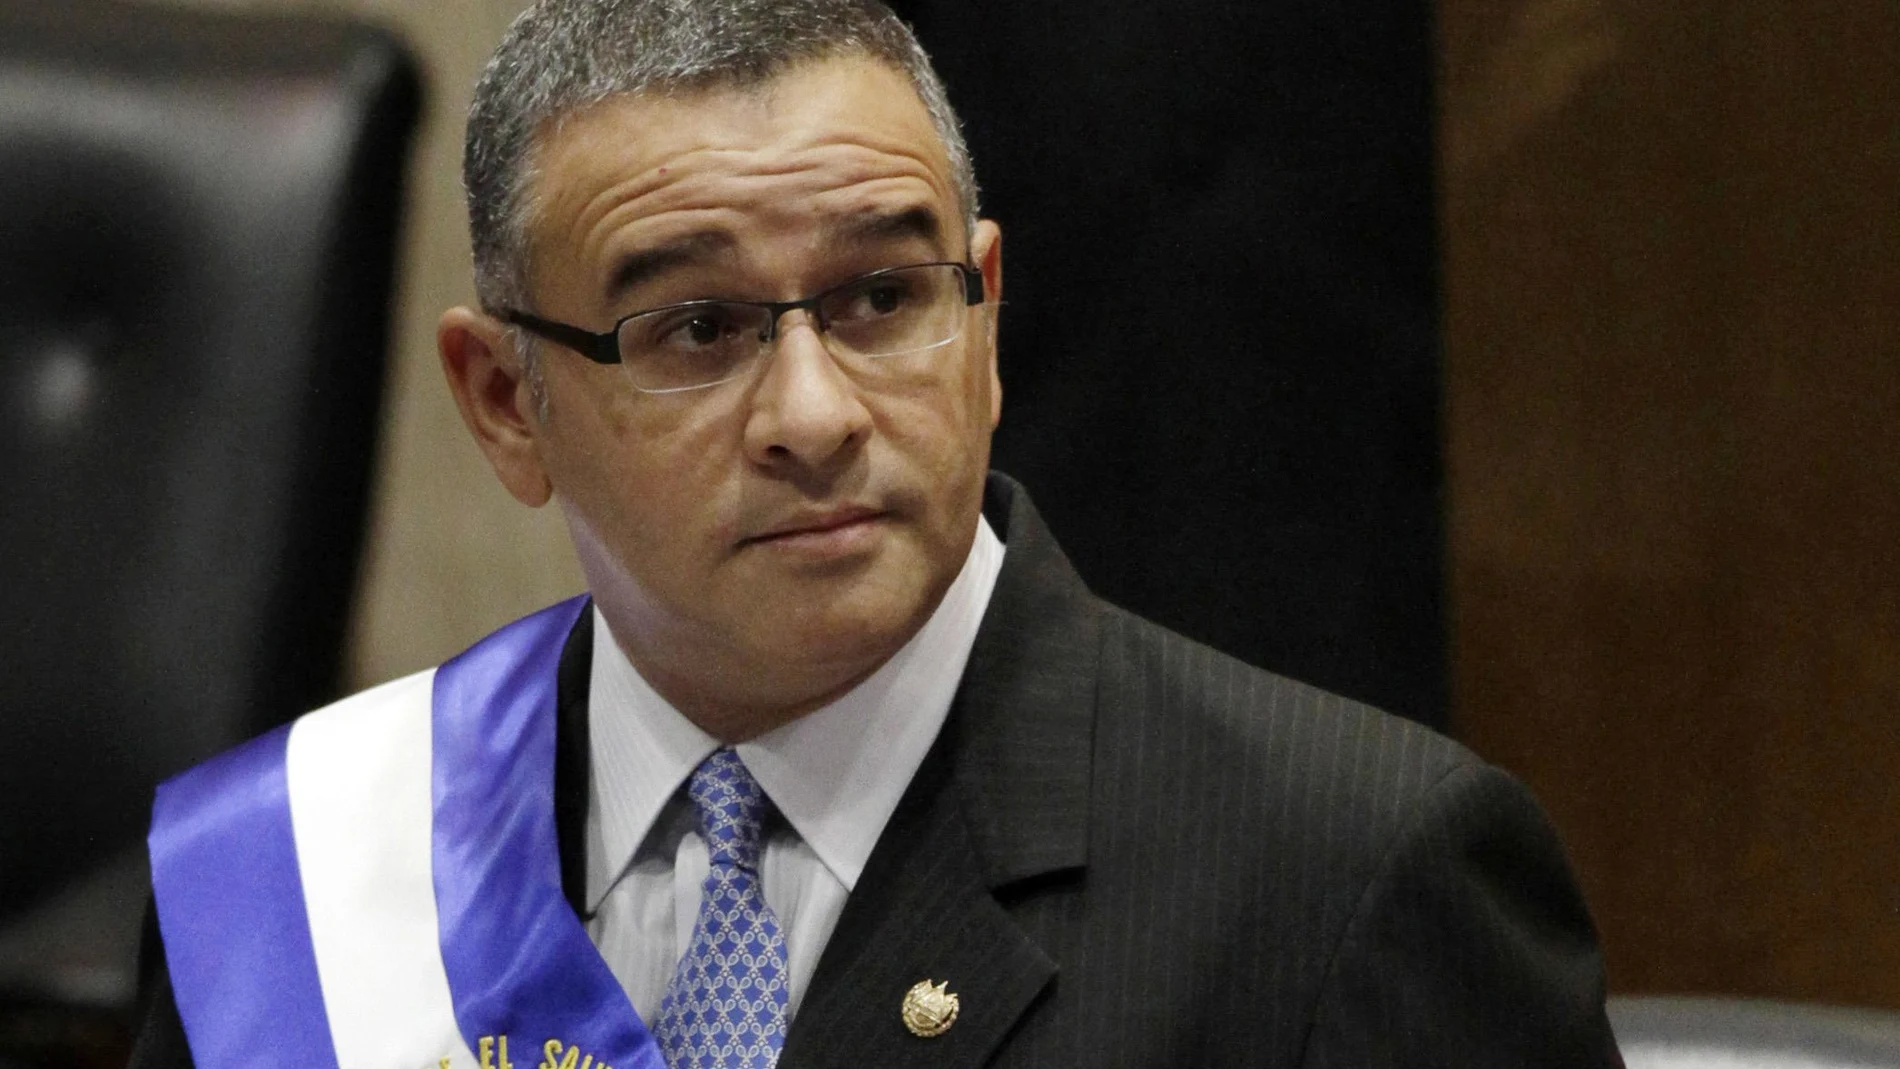 FILE - In this June 1, 2012 file photo, El Salvador's President Mauricio Funes stands in the National Assembly before speaking to commemorate the anniversary of his third year in office in San Salvador, El Salvador. The Salvadoran government announced on Thursday, Dec. 17, 2020, that it has new criminal charges against the ex-president. (AP Photo/Luis Romero, File)